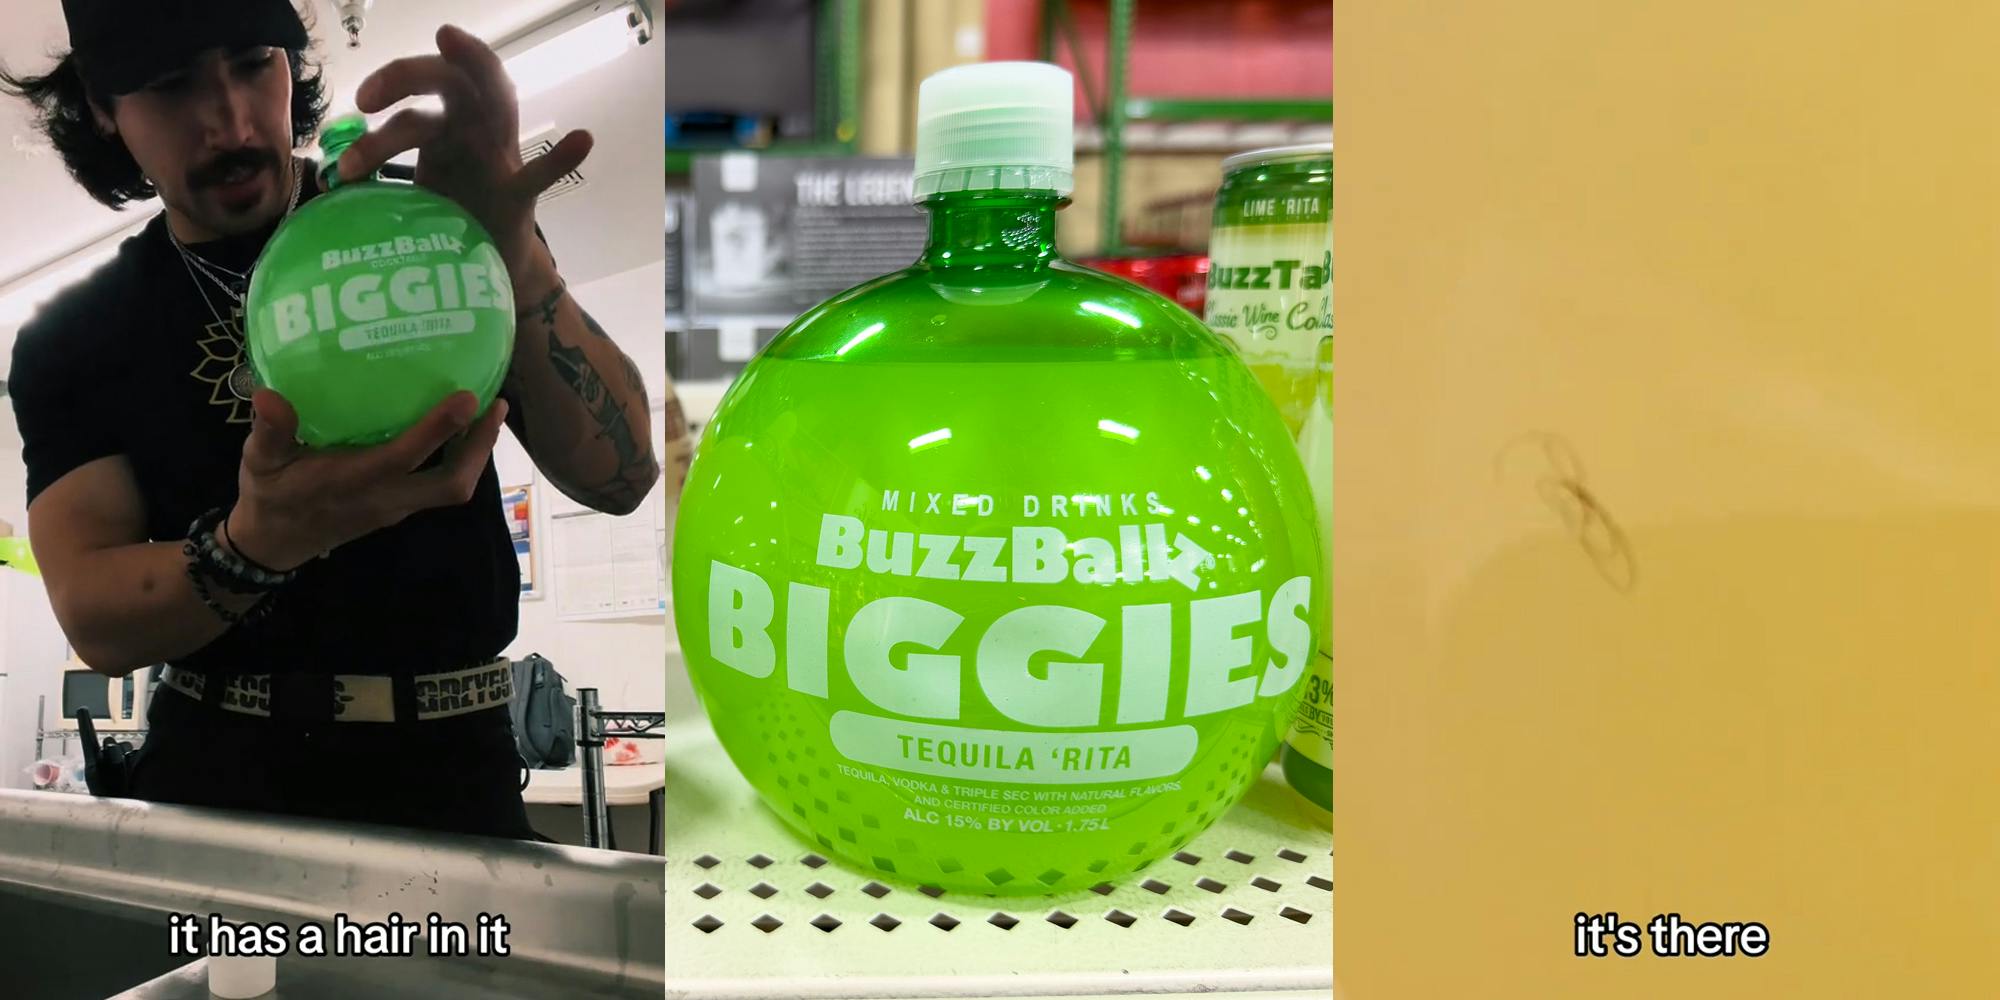 man holding BuzzBall Biggie with caption "it has a hair in it" (l) BuzzBall Biggie drink on shelf (c) hair in drink with caption "it's there" (r)